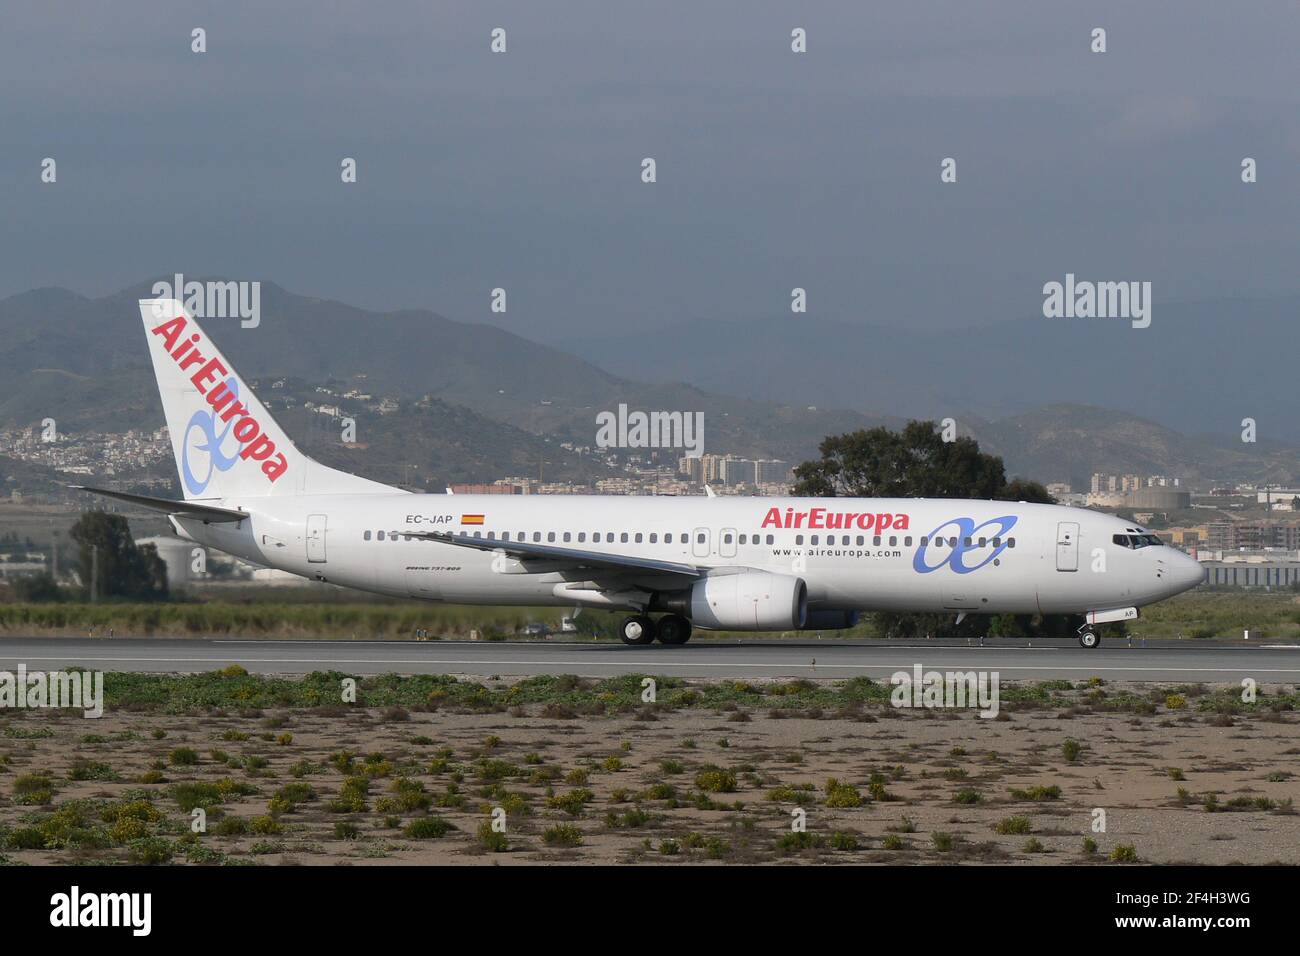 Air Europa Boeing 737-800 (EC-JAP) ready to take of from Malaga, Spain. Stock Photo